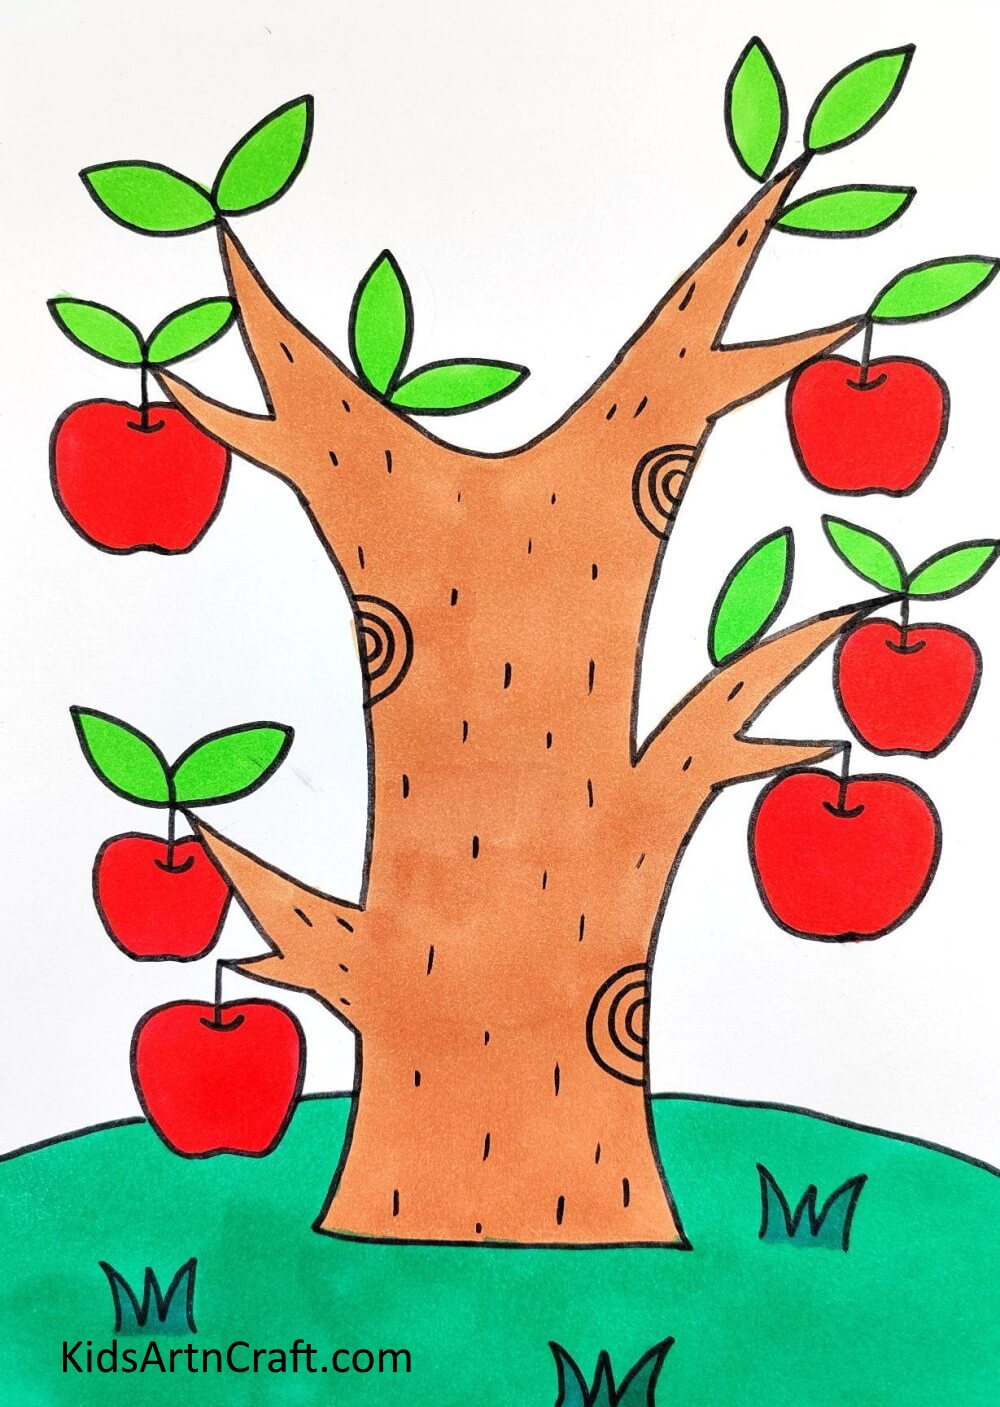 Coloring The Tree And Land - A straightforward tutorial for painting an apple tree